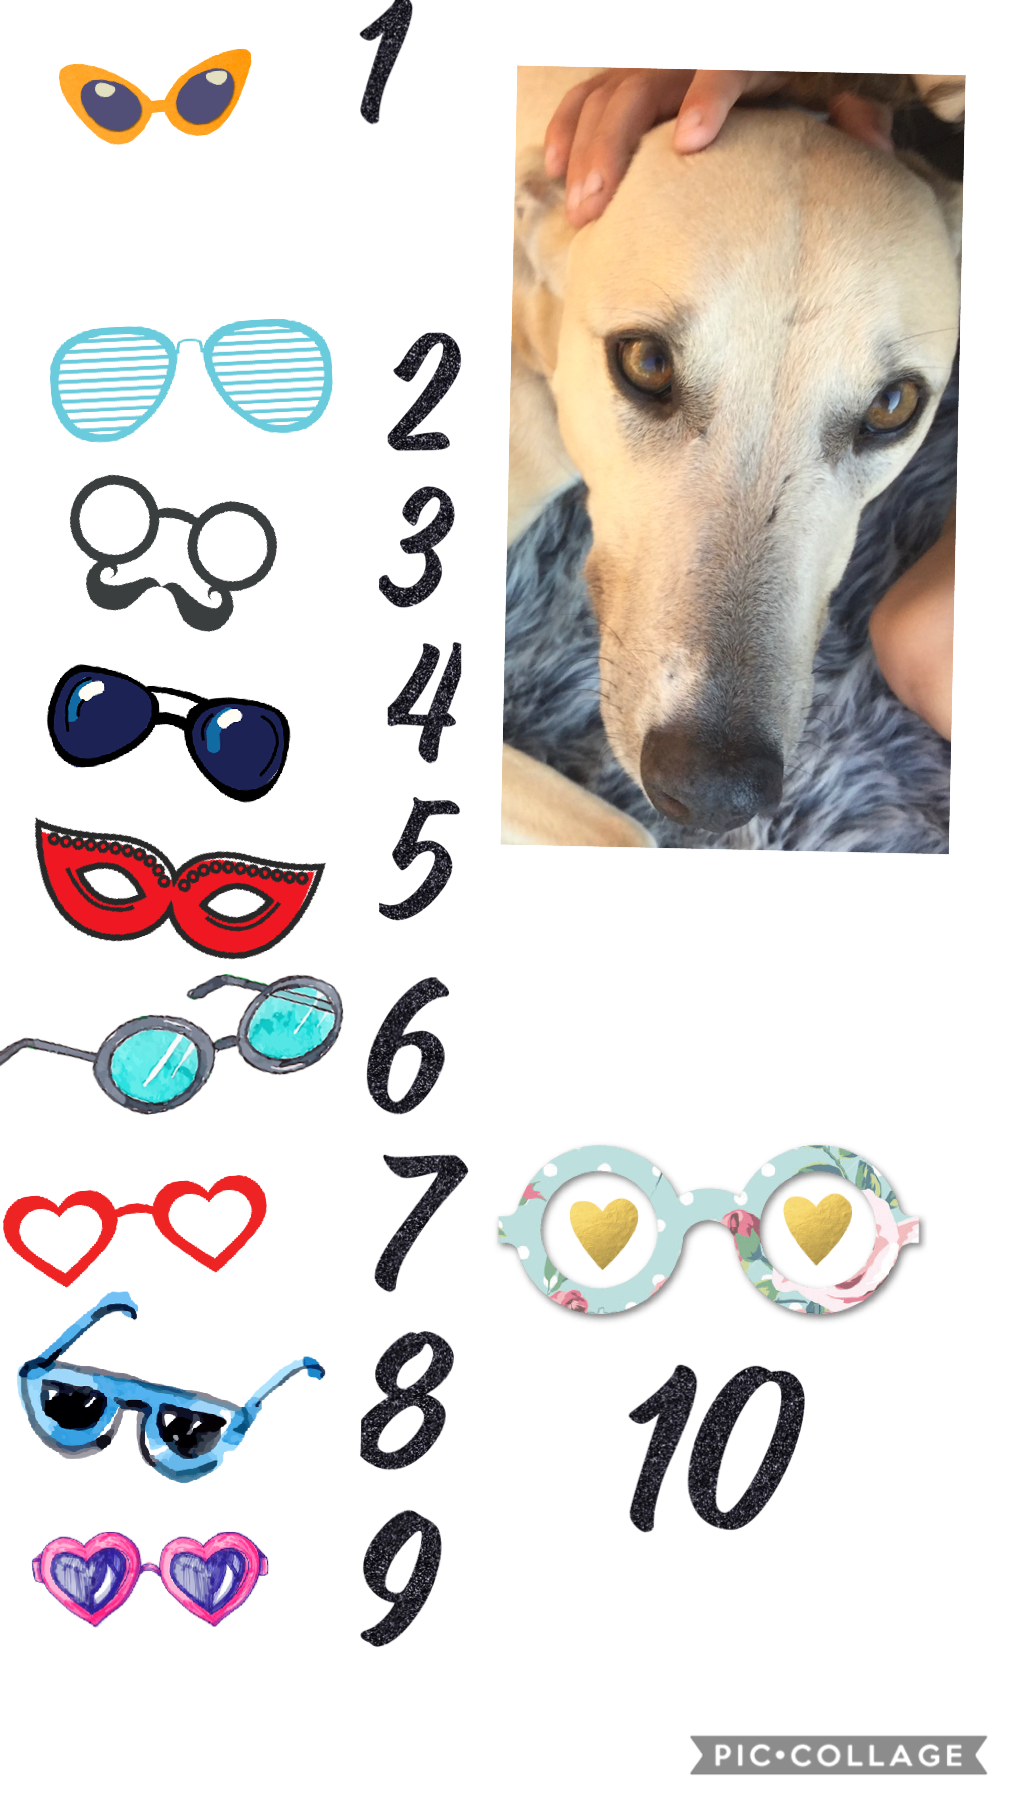 What glasses should I put on my dog
123456789 or 10
???